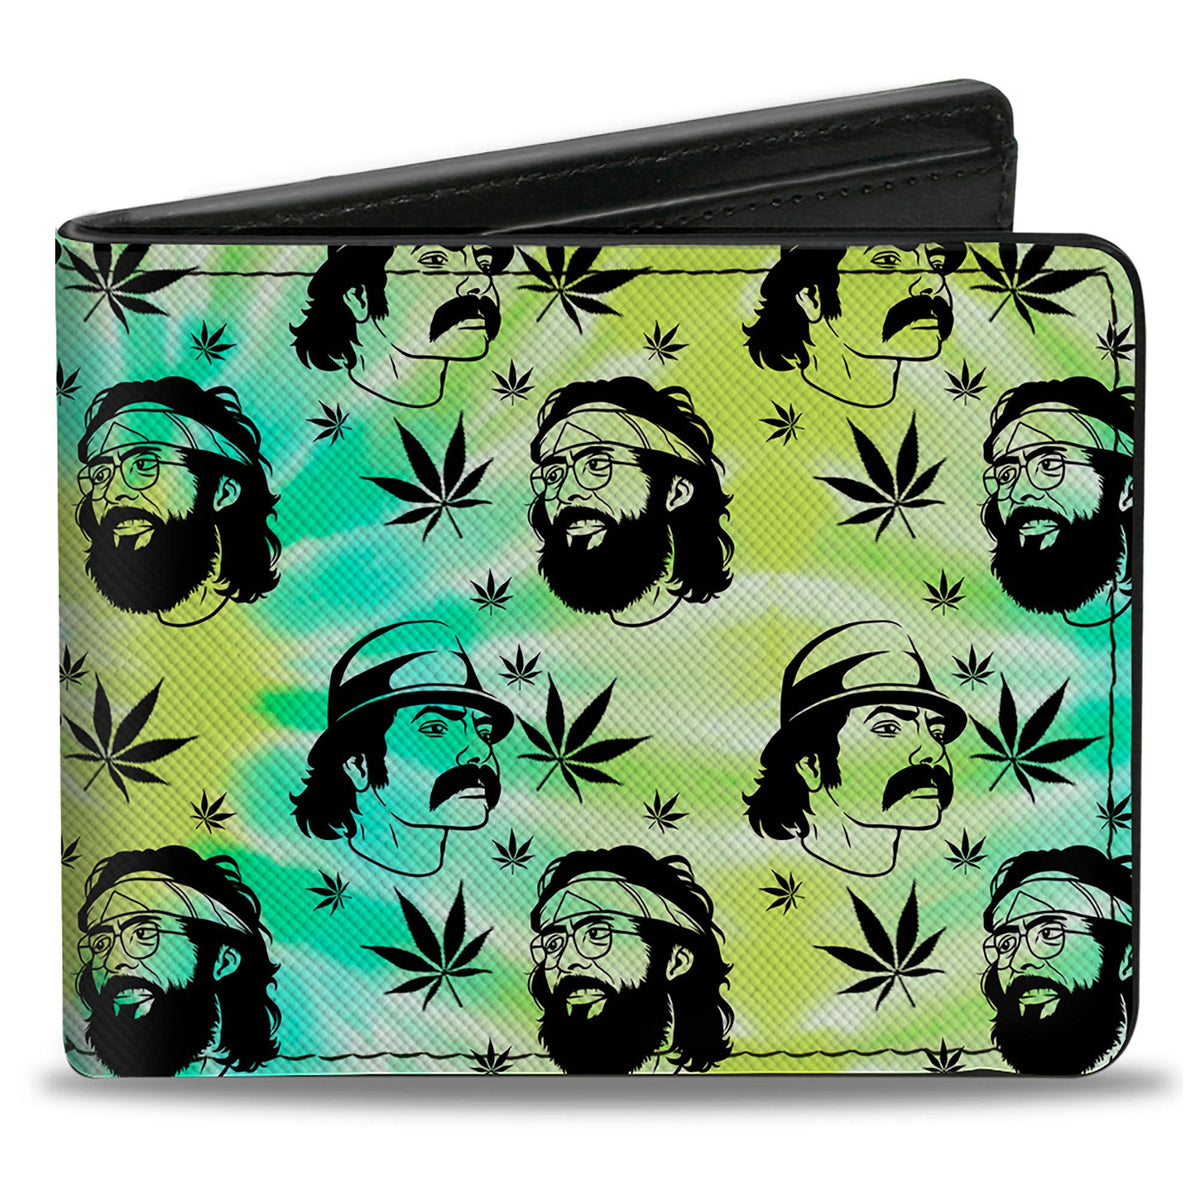 Bi-Fold Wallet - CHEECH & CHONG Caricature Faces/Pot Leaves Scattered Tie Dye Greens/Black